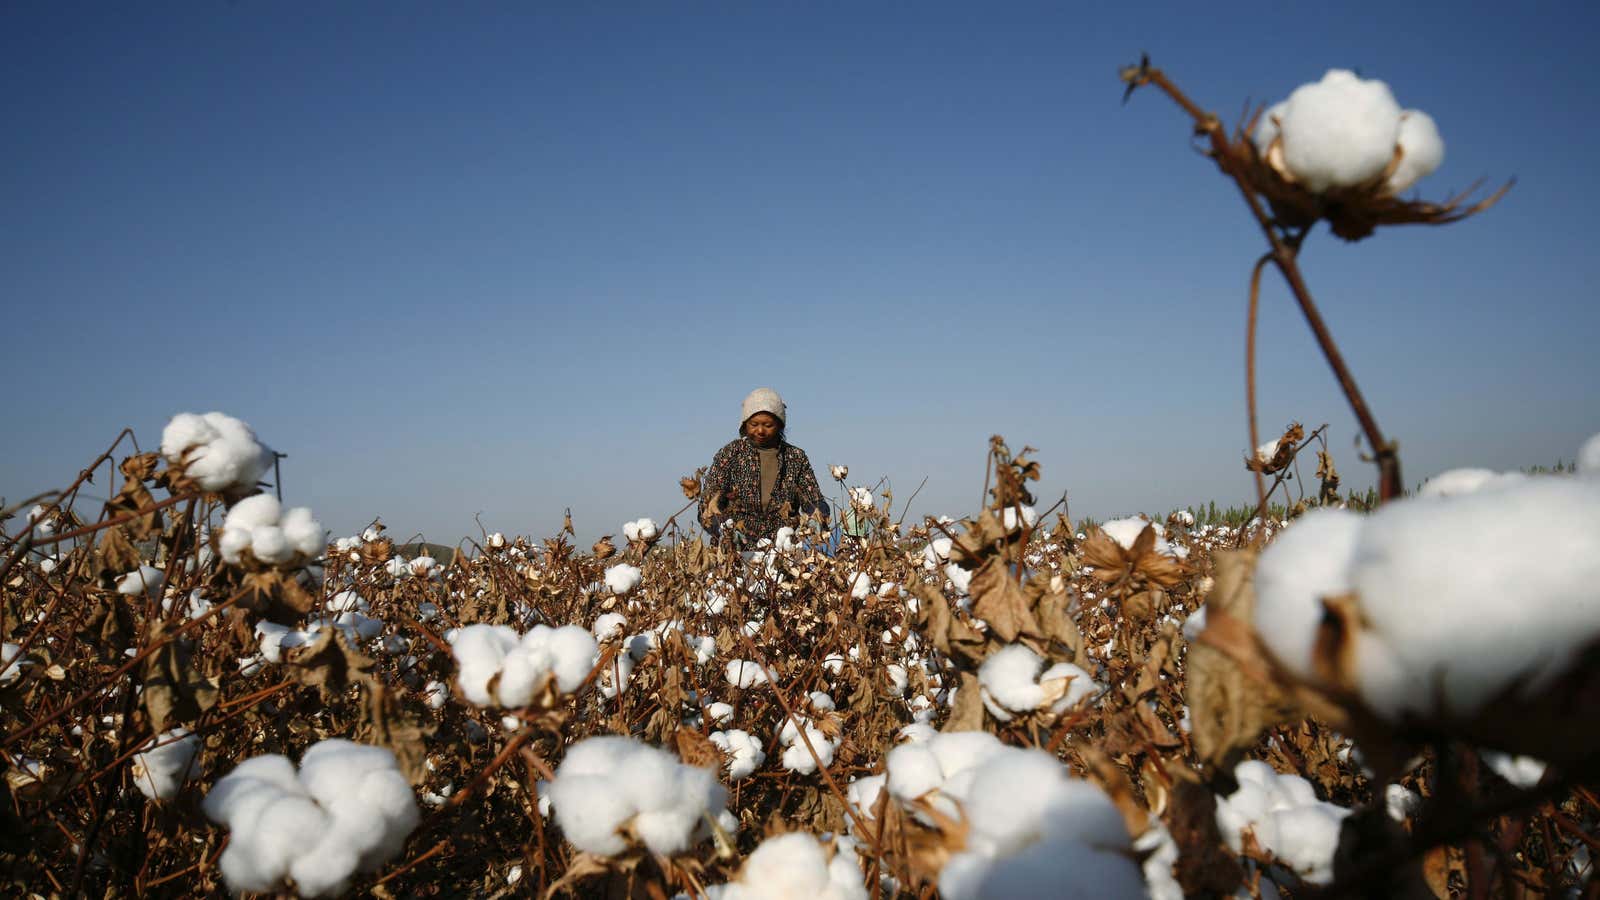 A new Trump administration order banning cotton from XPCC and its affiliates is causing confusion for fashion companies.